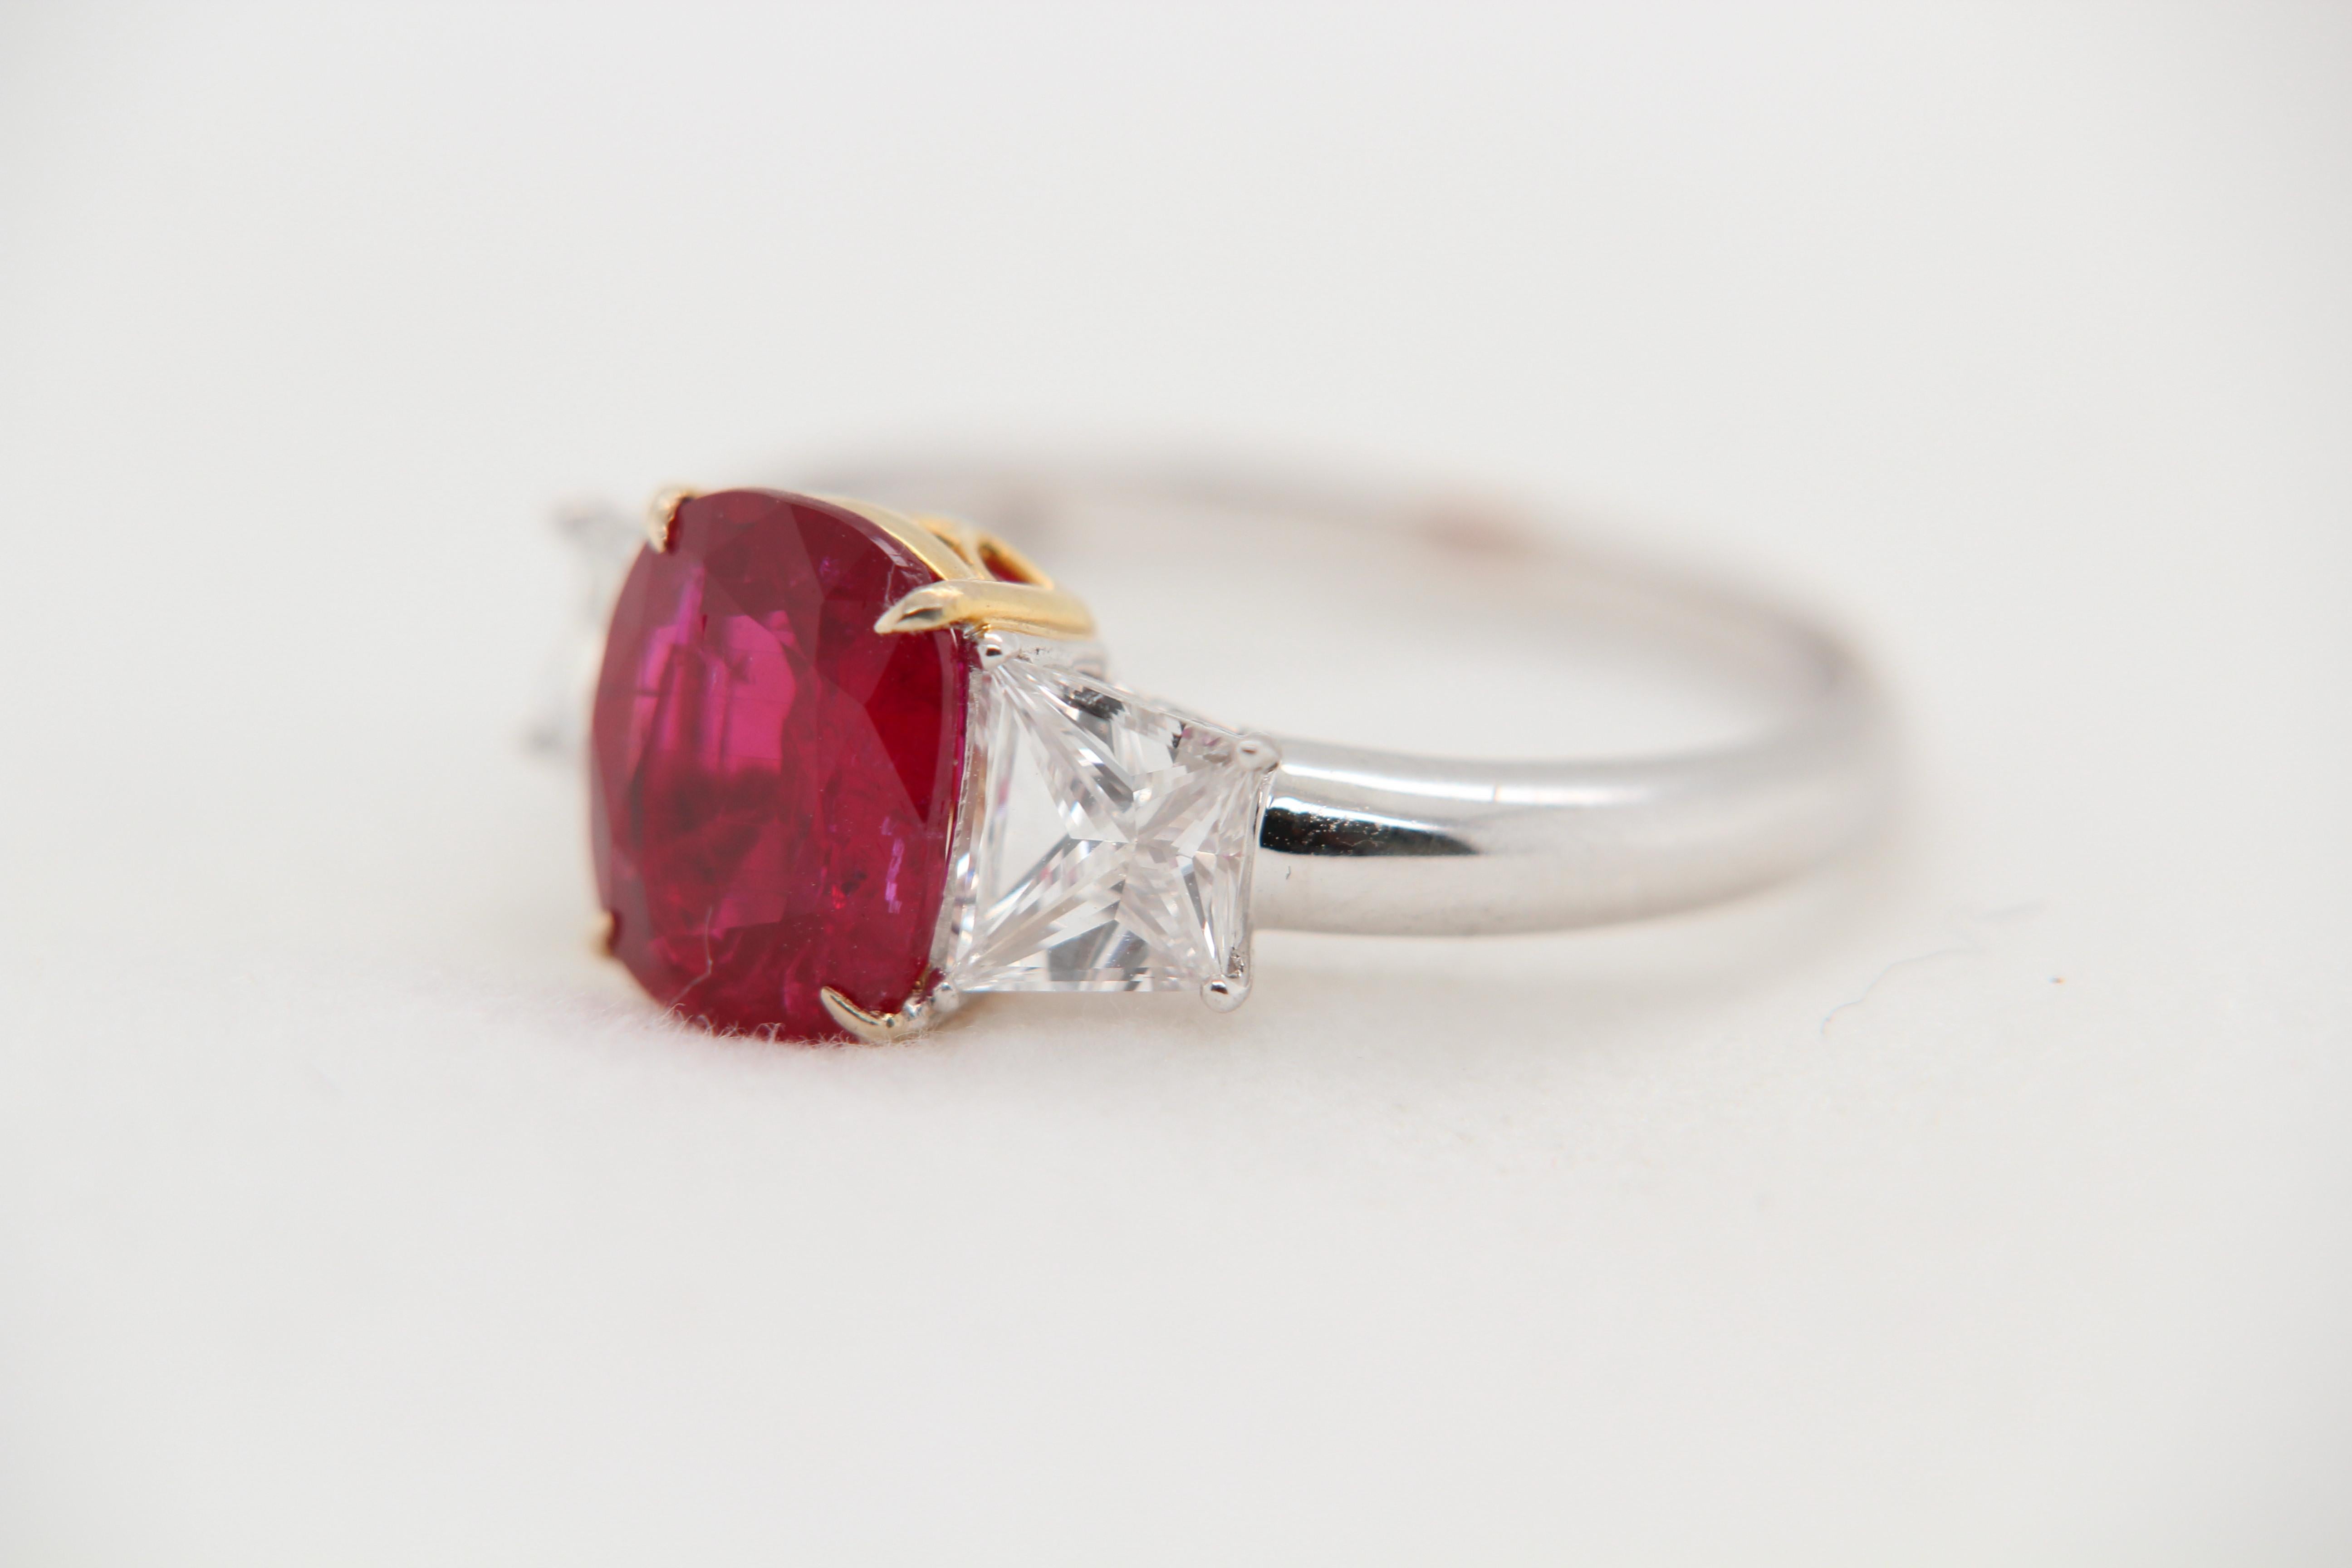 A new 2.44 carat Burmese ruby ring mounted with diamonds in 18 Karat gold. The ruby weighs 2.44 carat and is certified by Gem Research Swisslab (GRS) as natural, no heat, and 'Vivid Red Pigeon's Blood'. The ruby is from the 'Mogok' mine in Burma.